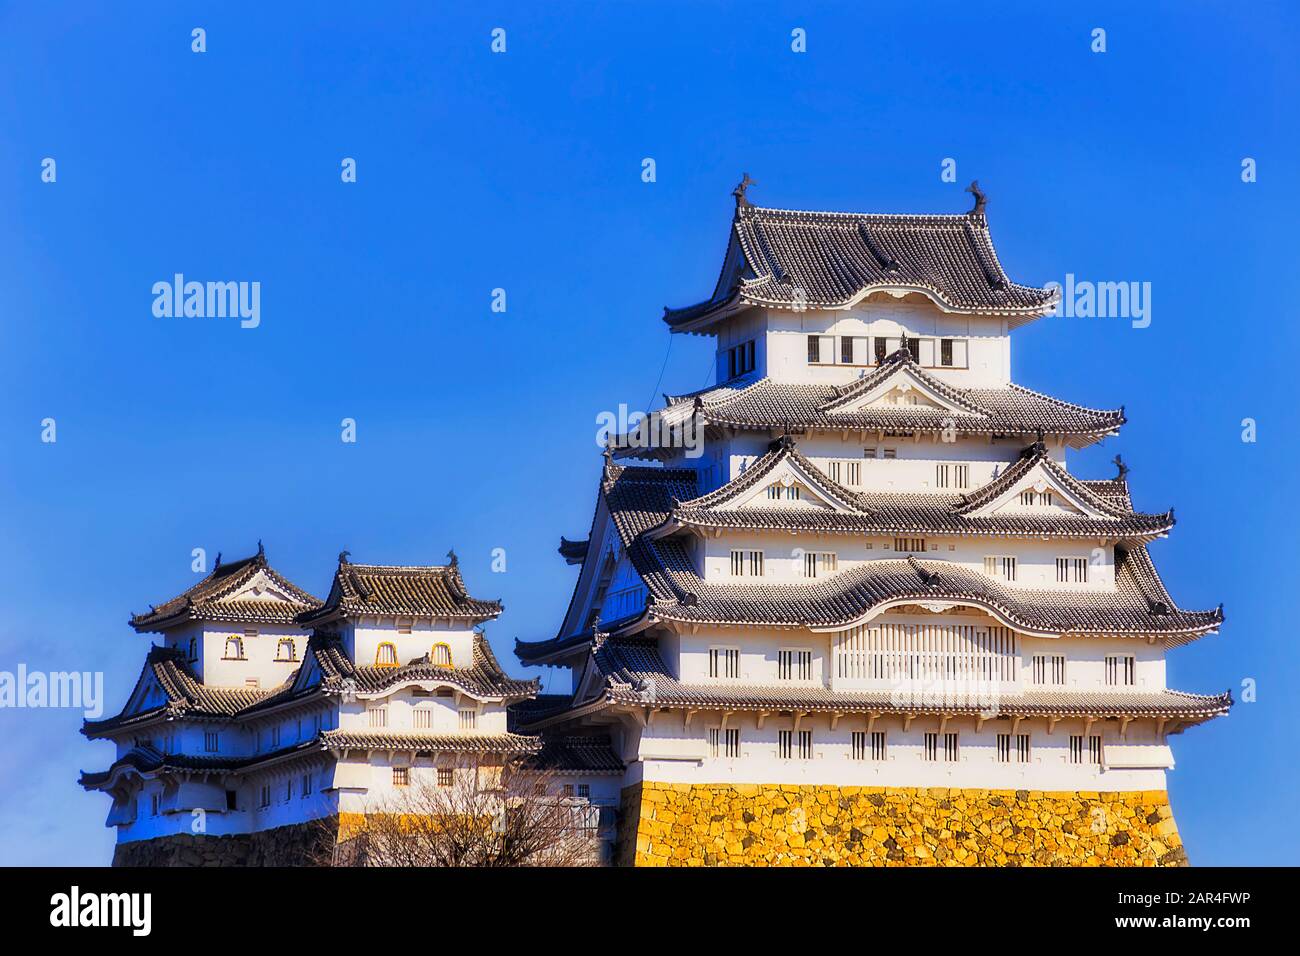 The main keep of the white castle in Japan near Osaka city agains blue sky in bright sun light - traditional japanese architecture. Stock Photo